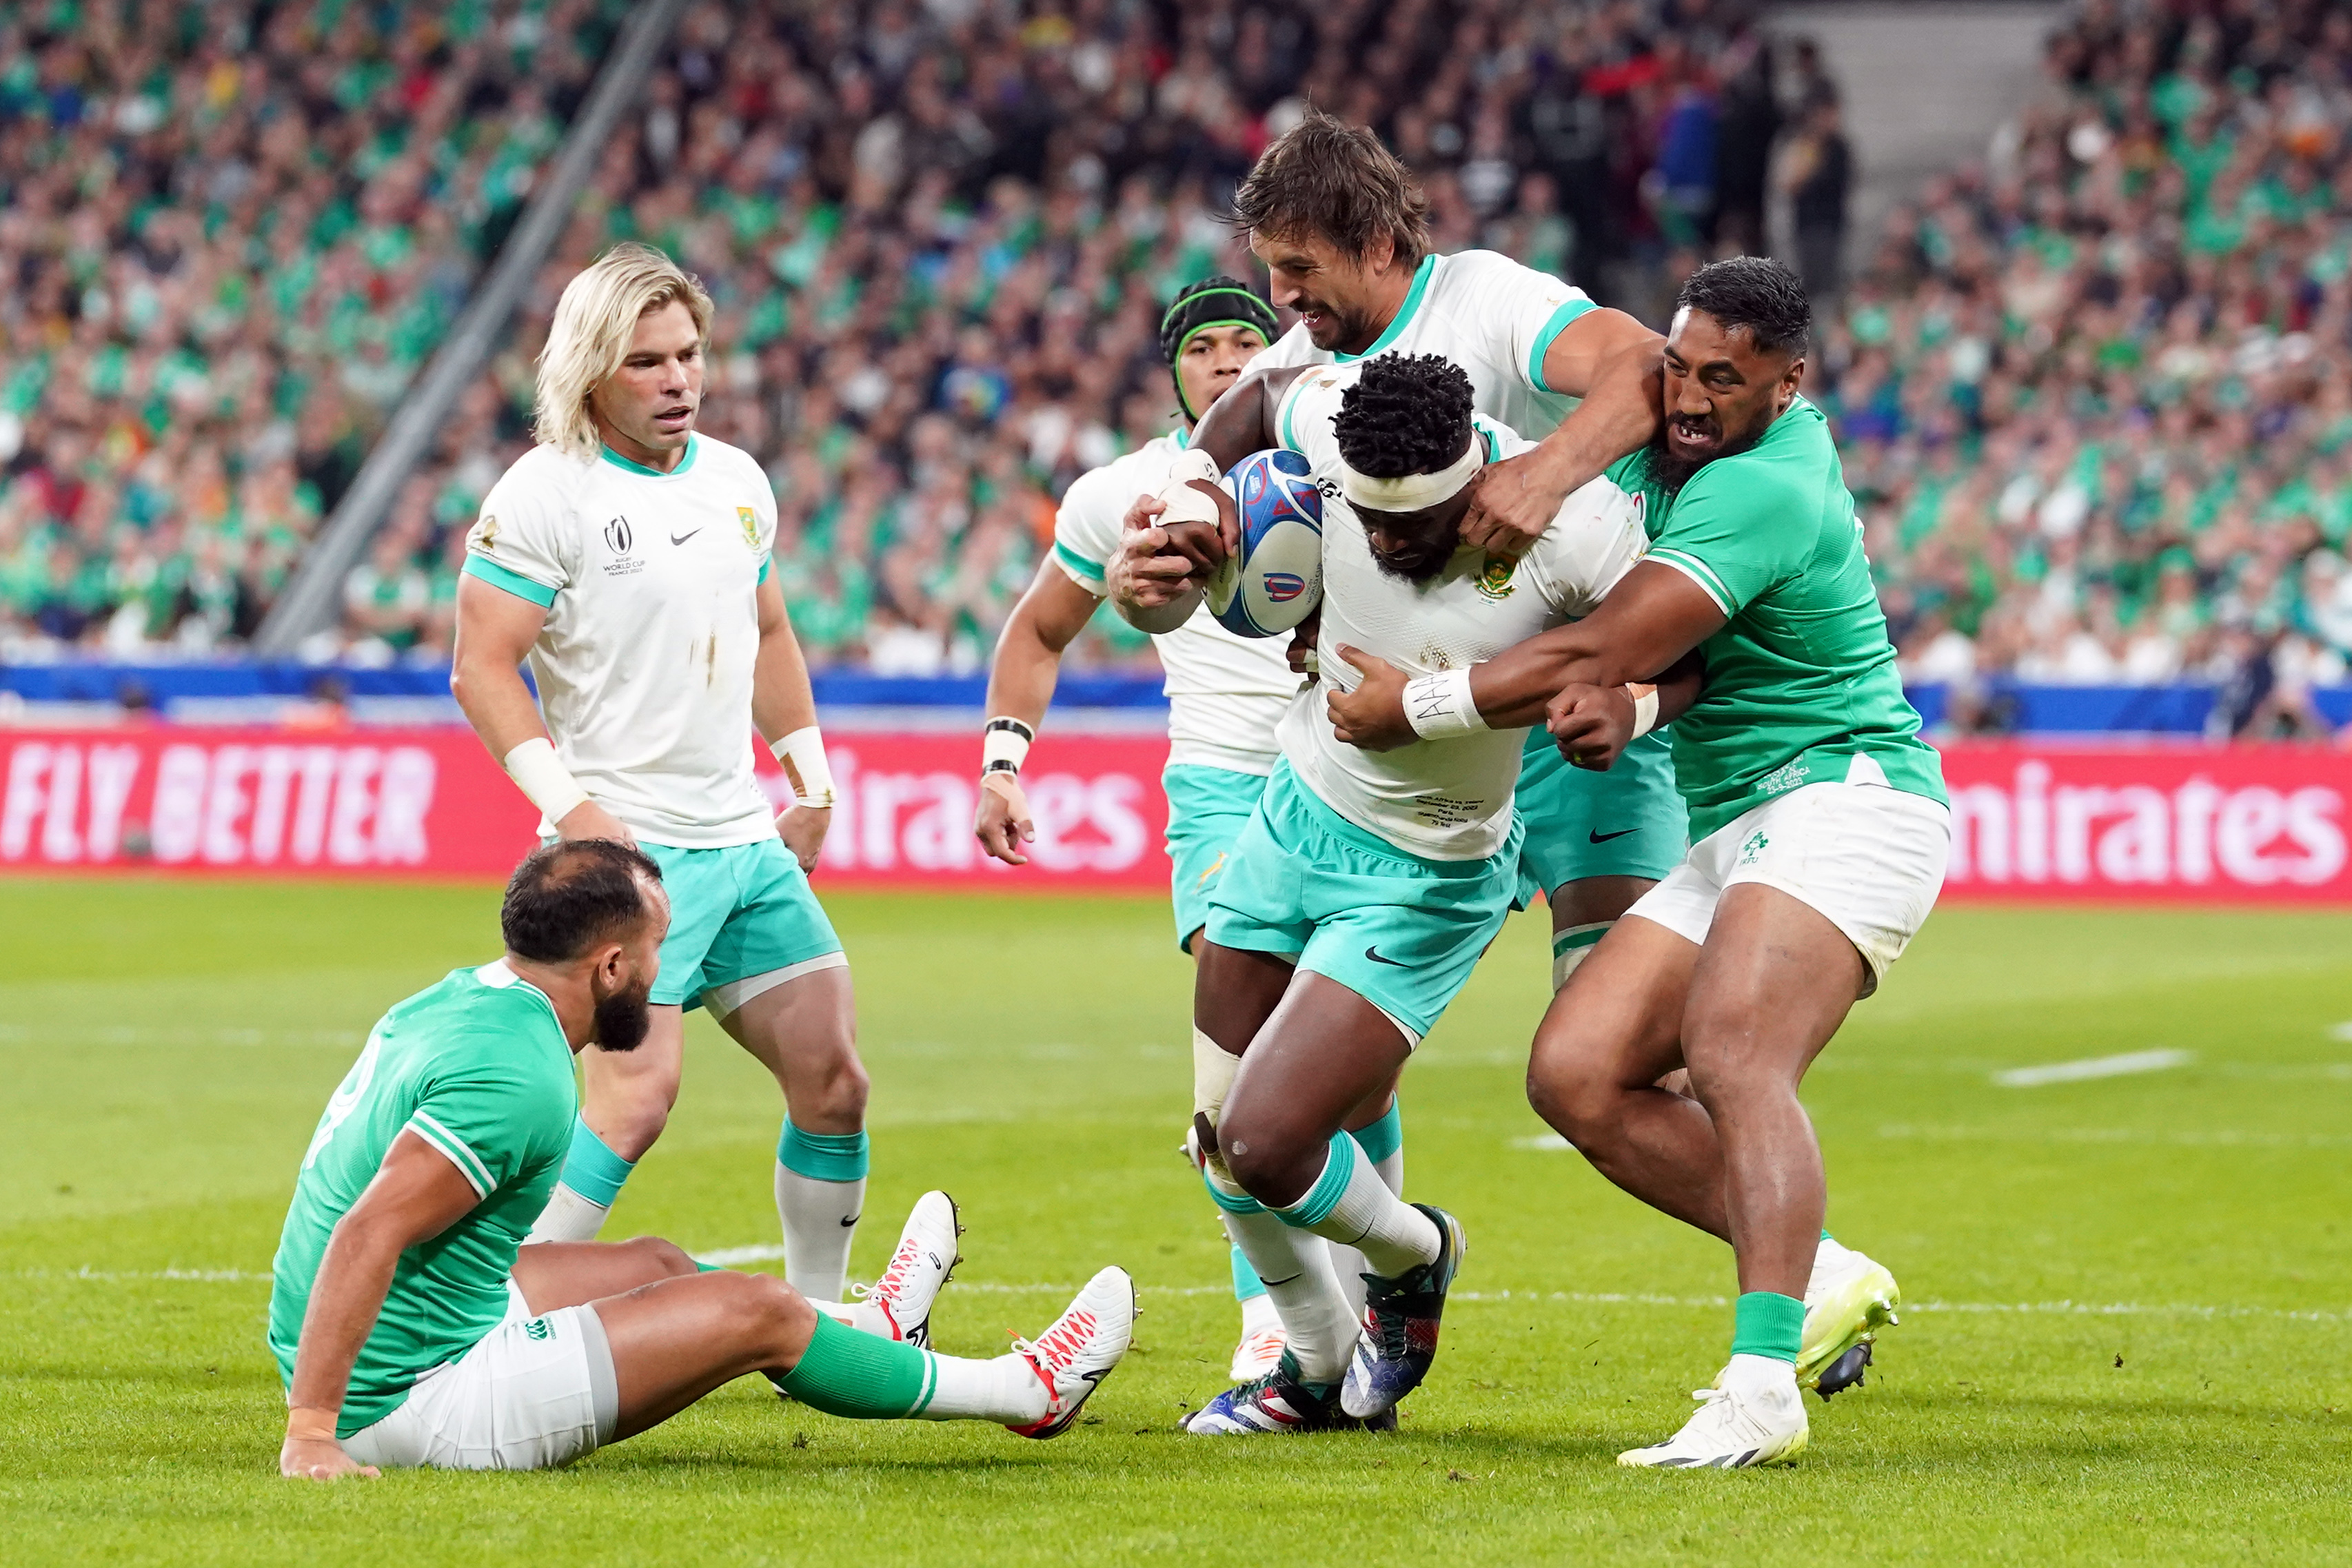 South Africa captain Siya Kolisi, with ball, says his side cannot dwell on a narrow defeat in Paris